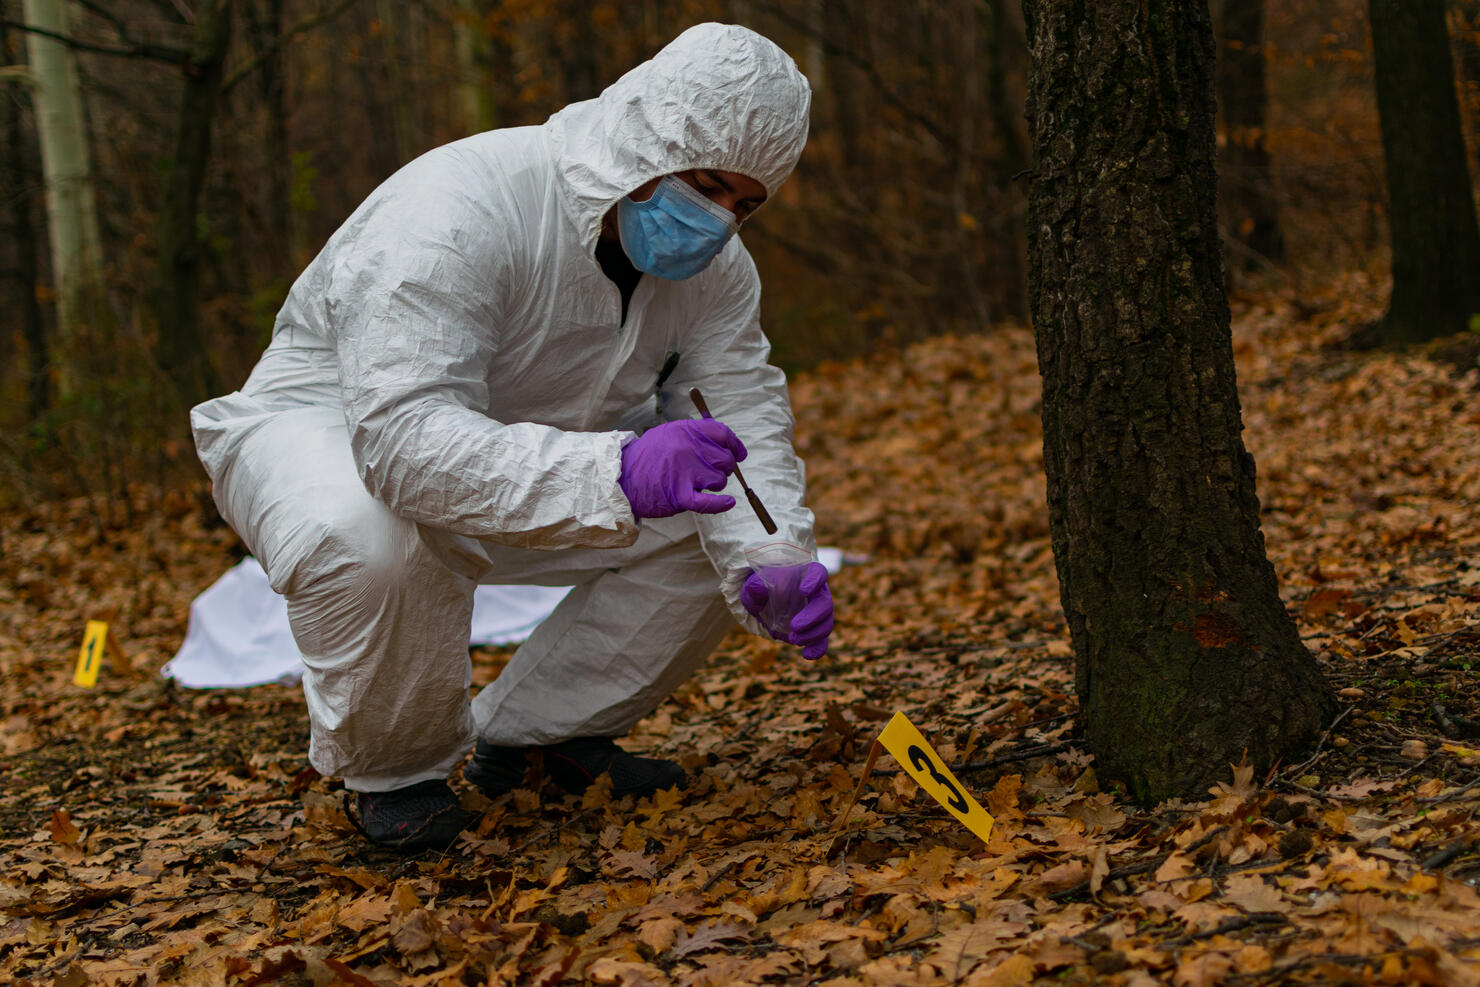 Forensic scientist and young detective working at the crime scene in the woods, looking for clues and examining and photographing the evidence, trying to solve this mysterious murder.